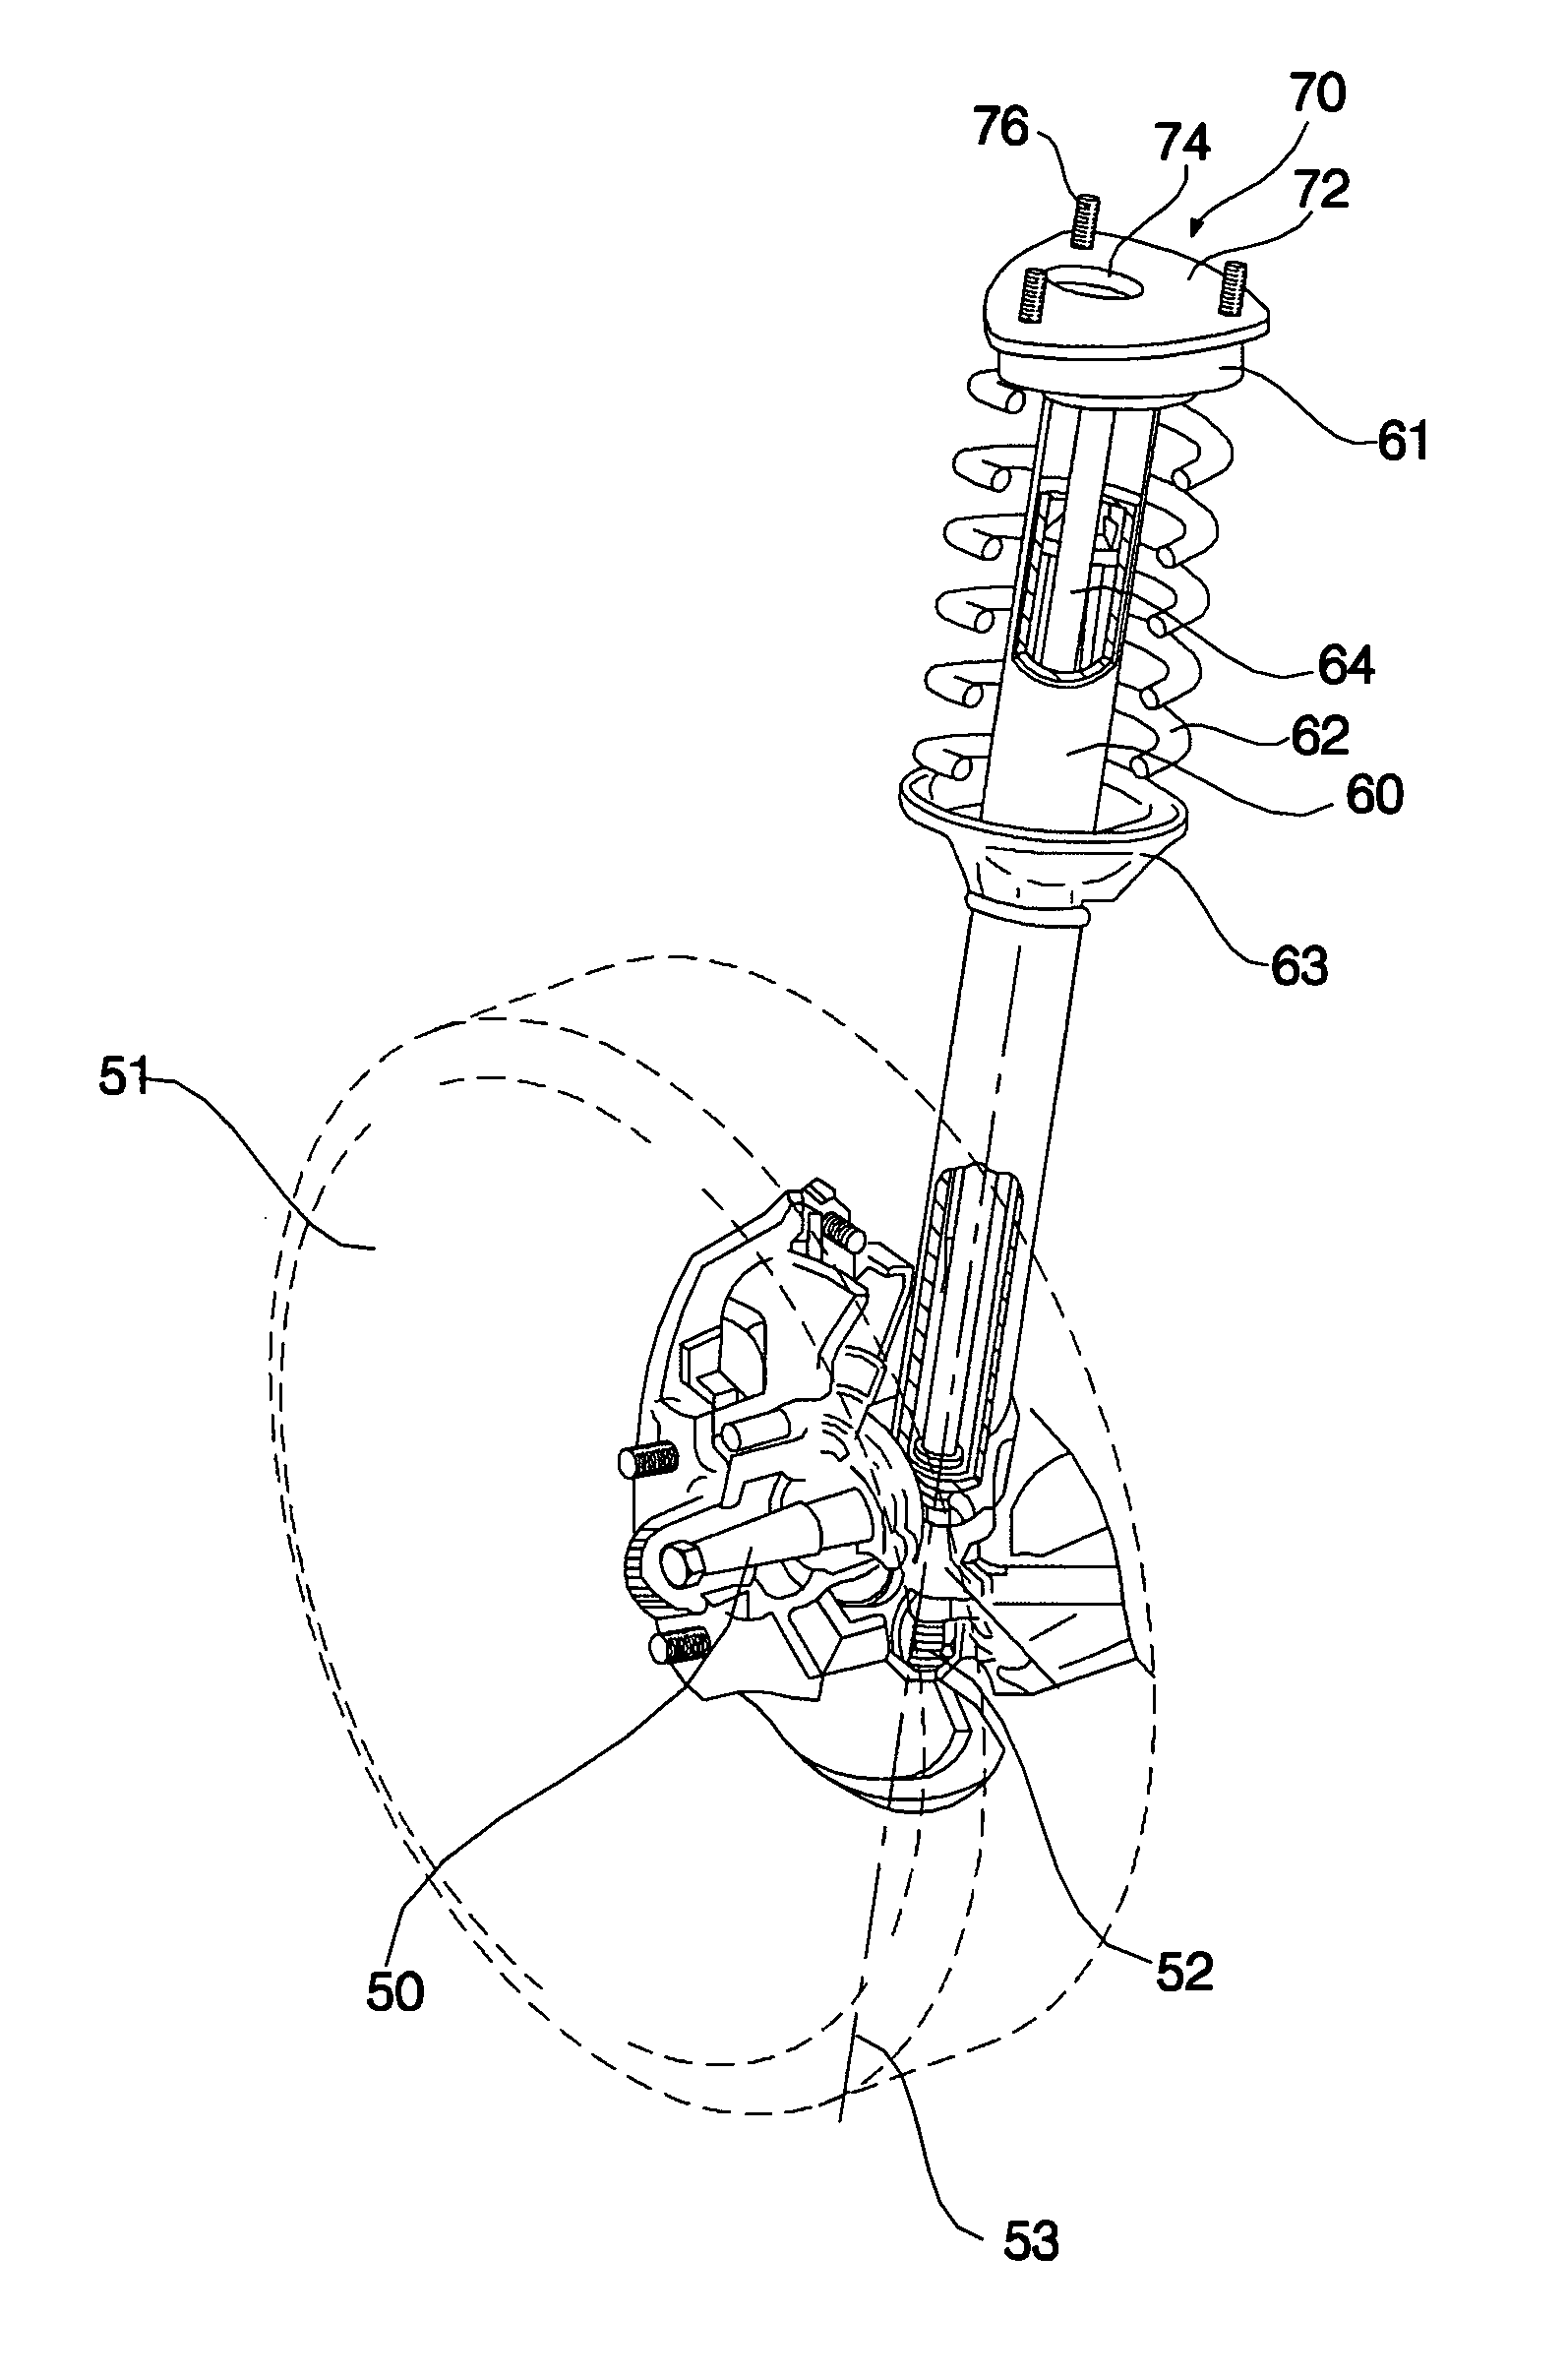 Suspension and insulator of the same